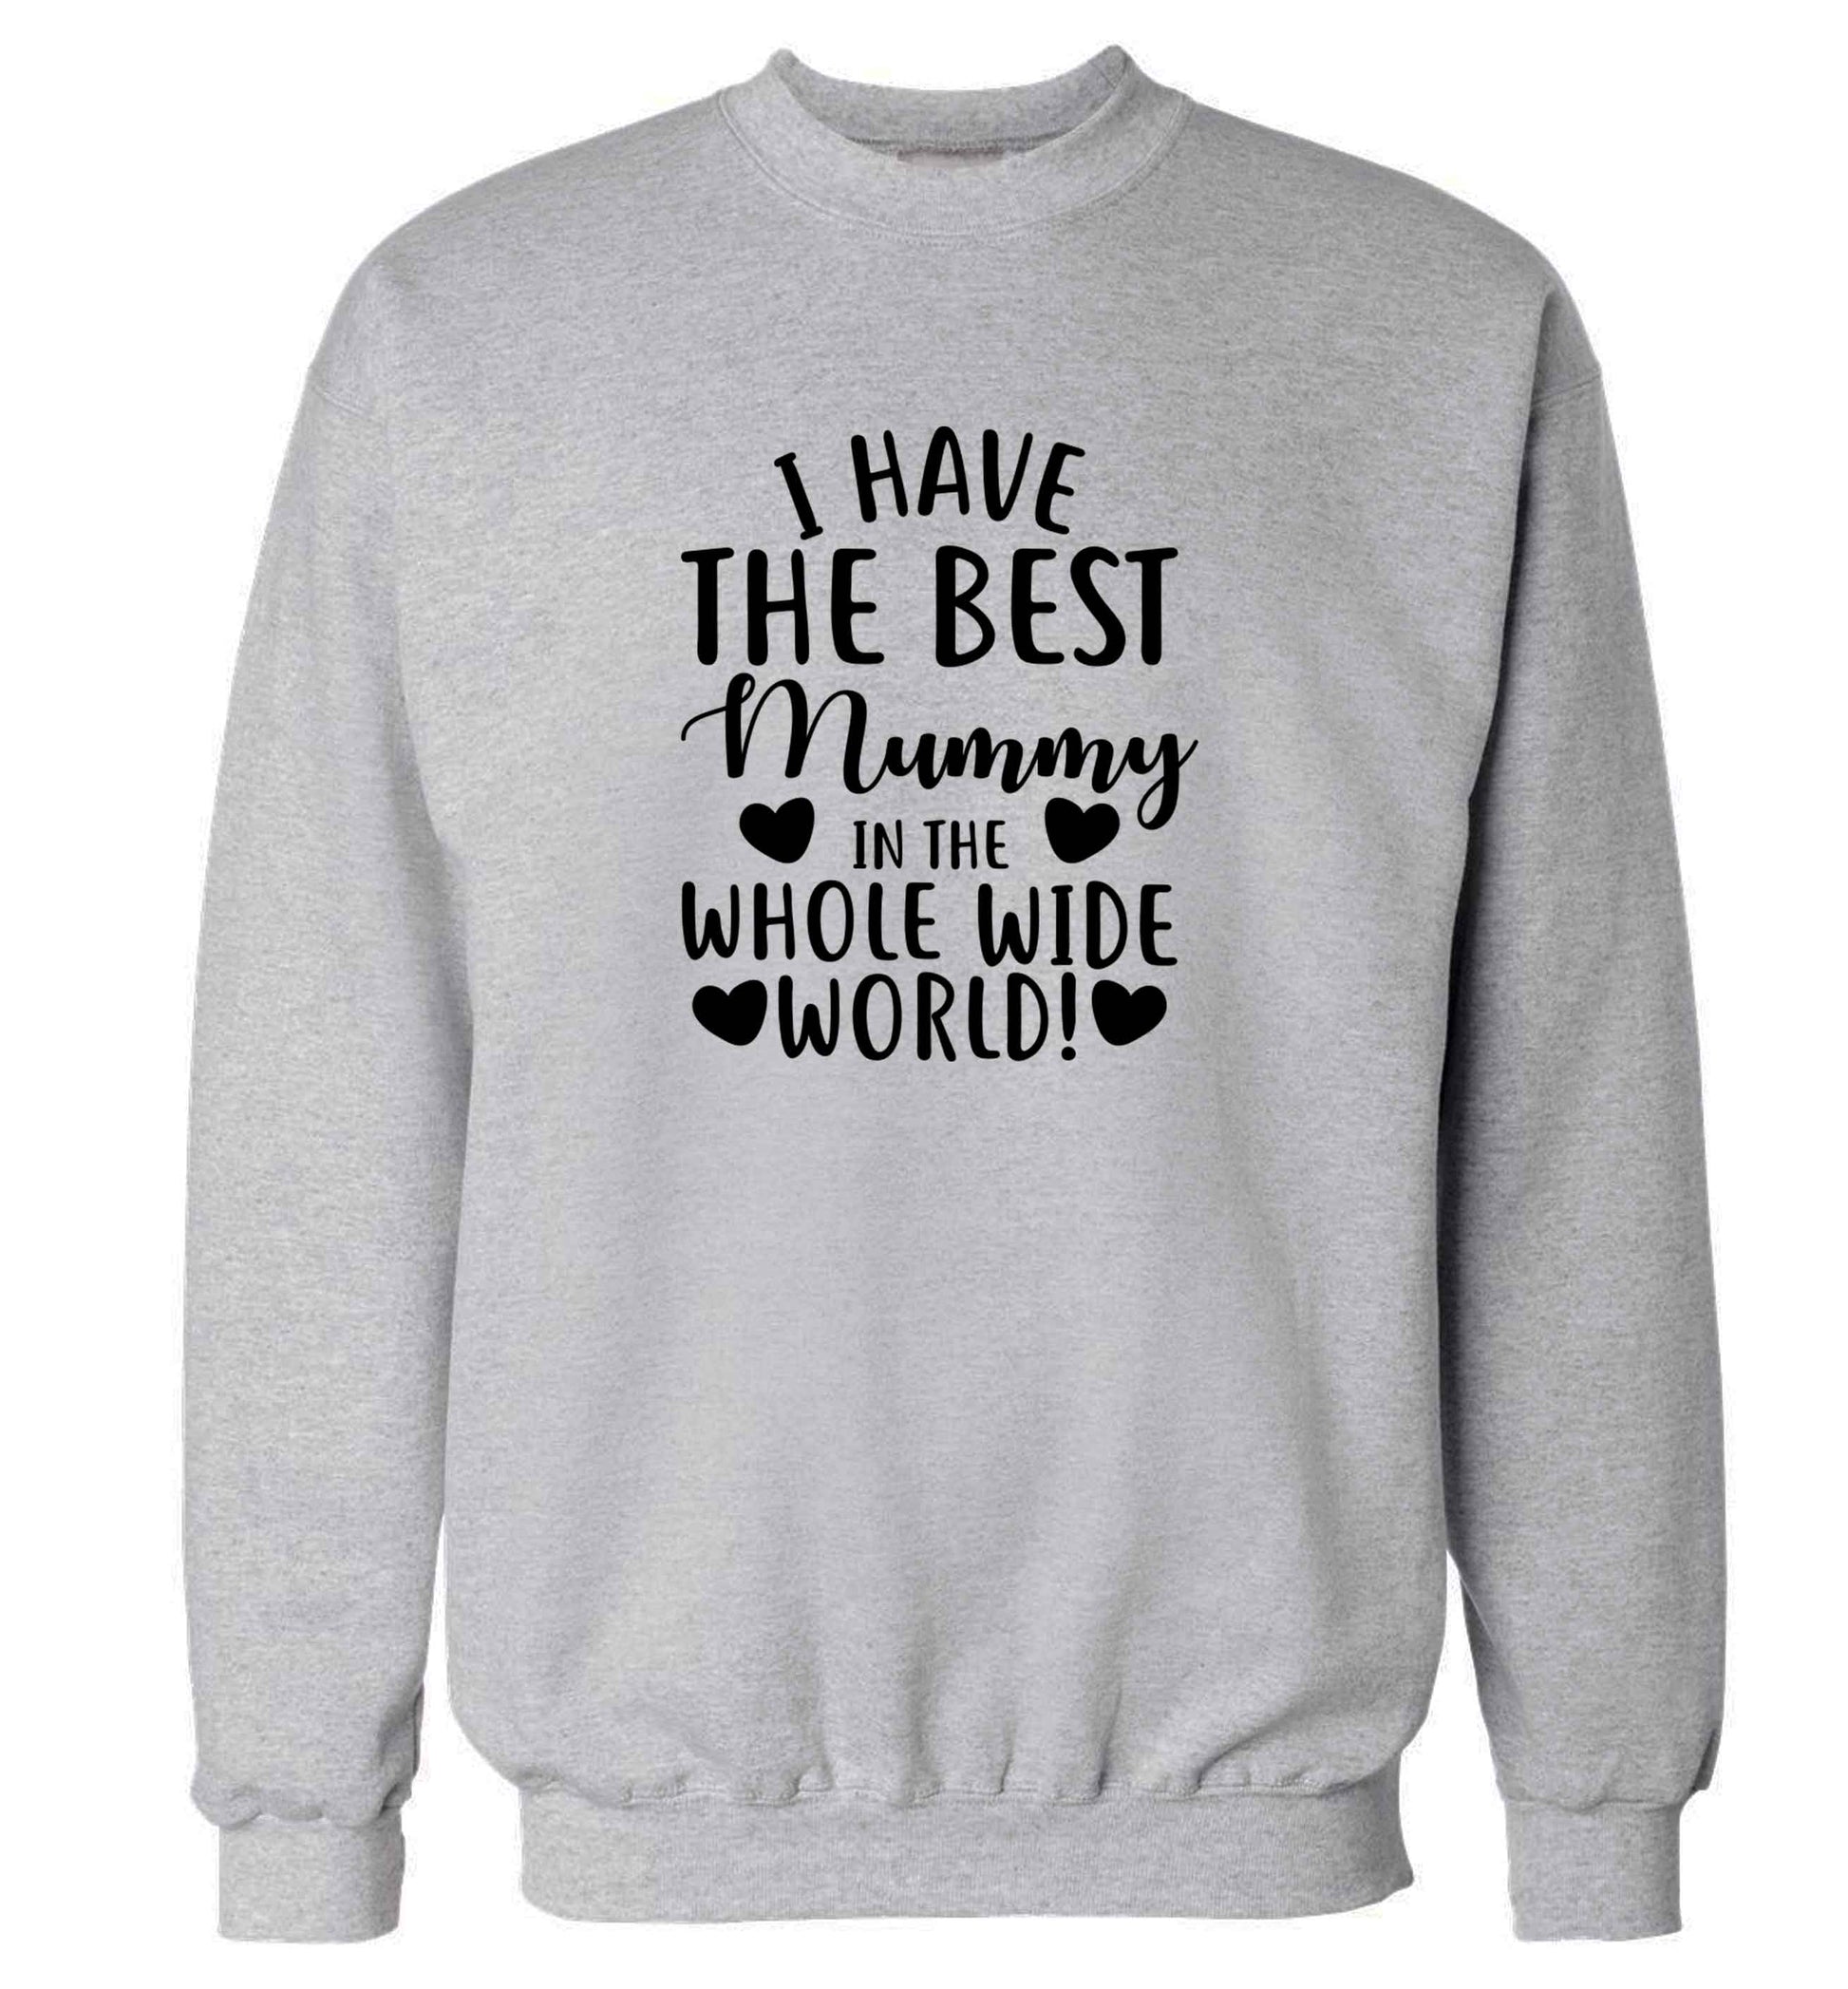 I have the best mummy in the whole wide world adult's unisex grey sweater 2XL